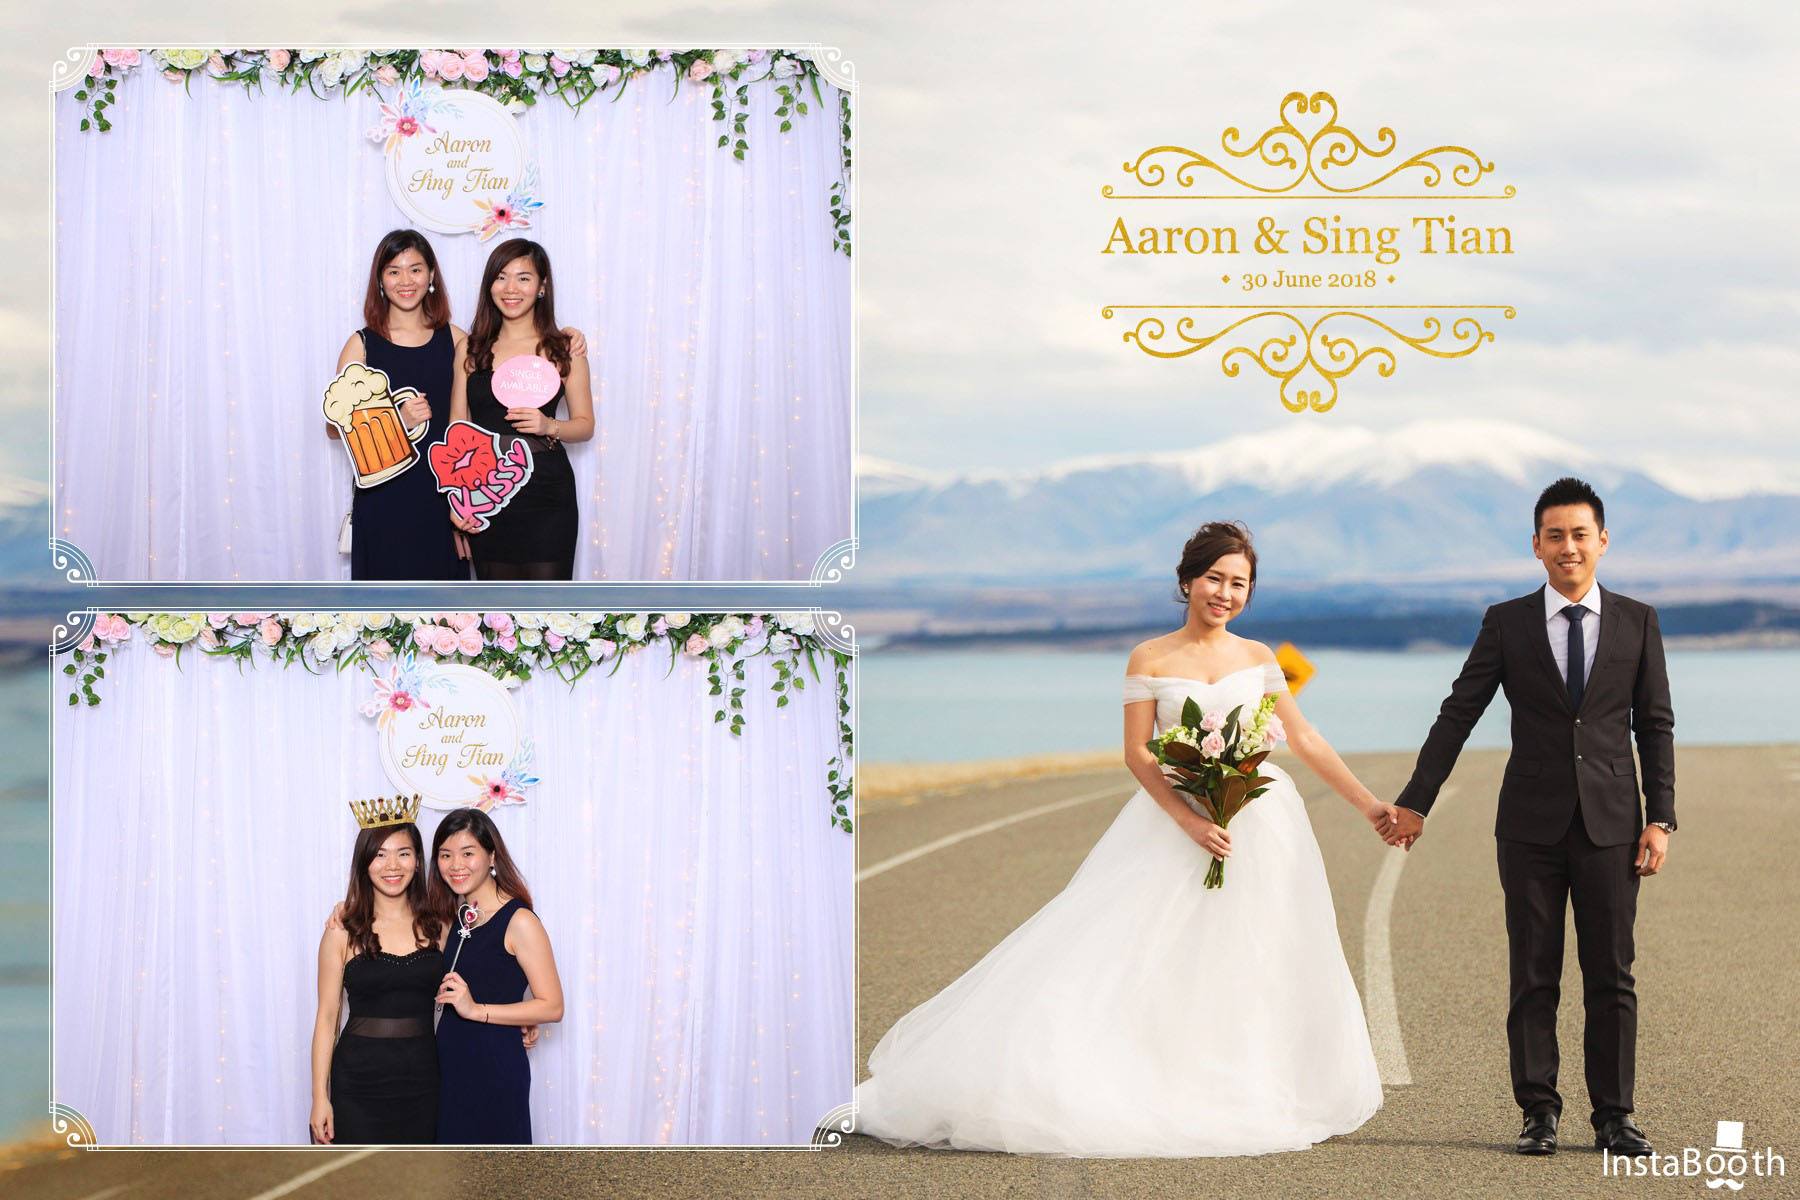 photobooth - Aaron and Sing Tian